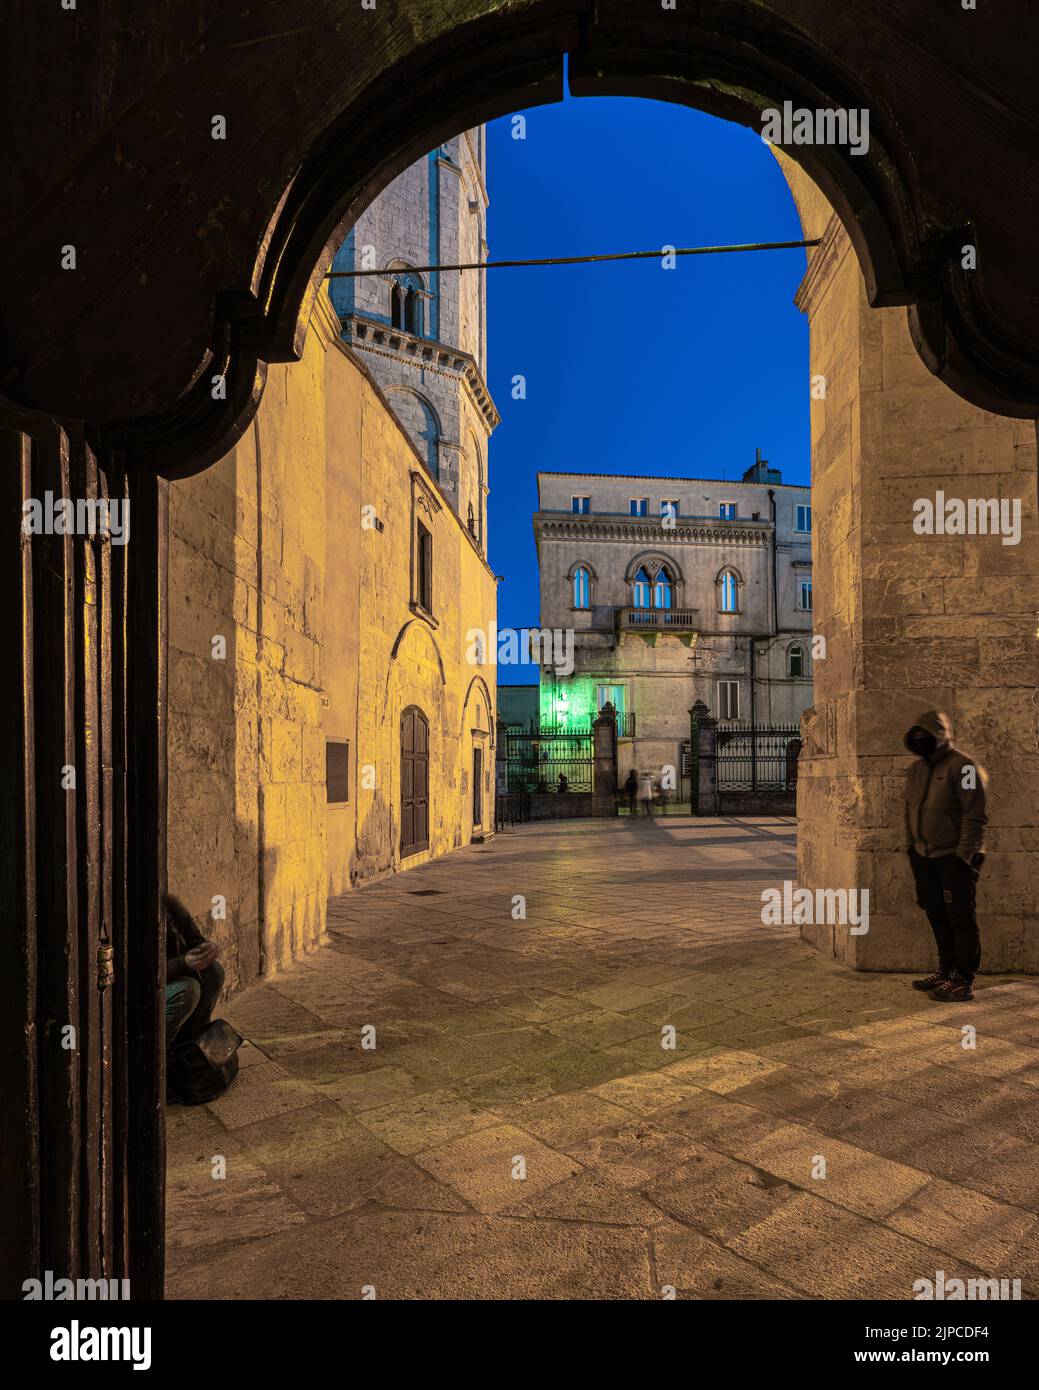 View of the square in front of the entrance to the Sanctuary of San Michele Arcangelo in Monte Sant'Angelo. Monte Sant'Angelo, Puglia, Italy Stock Photo